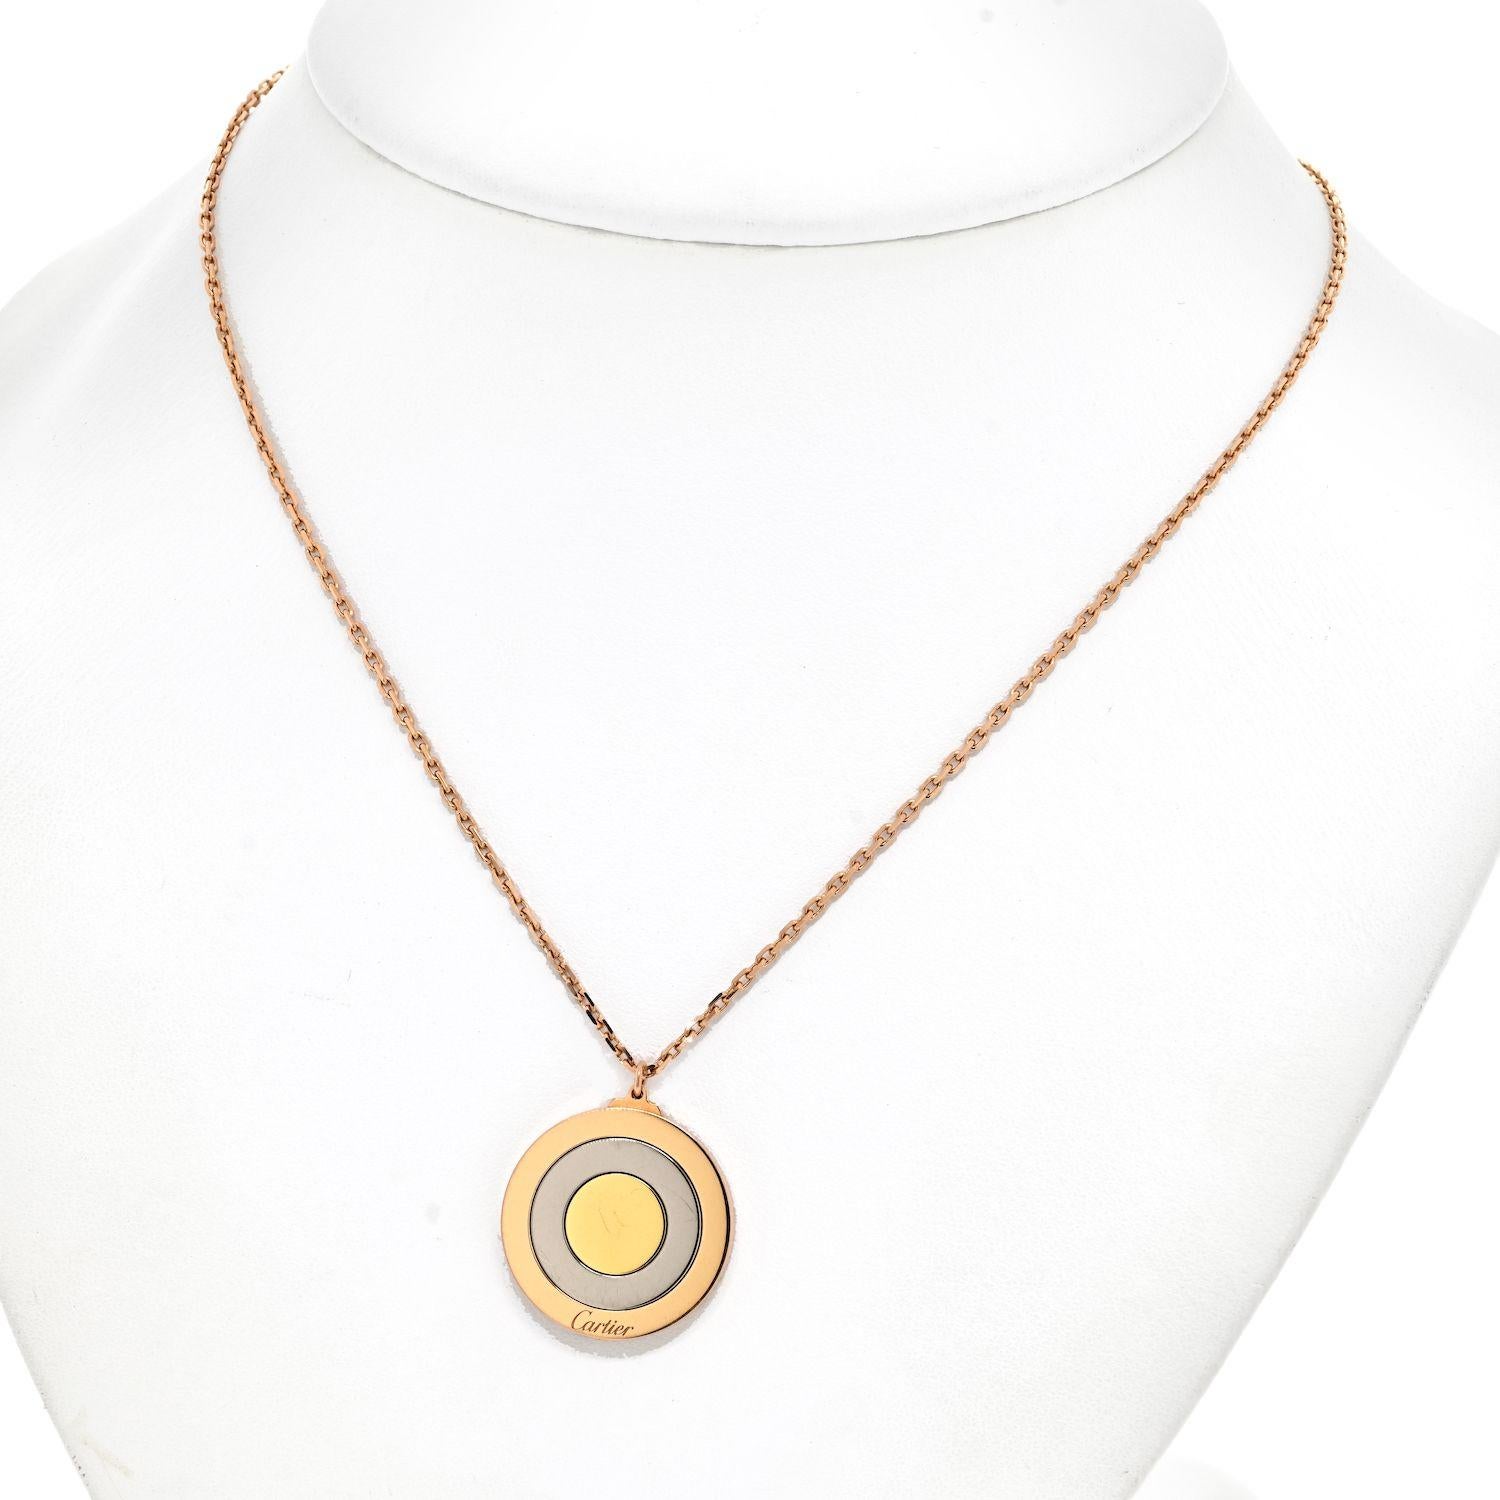 Presenting an exquisite spinning pendant crafted in 18k rose gold by Cartier. The pendant showcases a captivating trio of circular discs that elegantly graduate in size. Alternating between outer discs of 18k rose gold and inner discs of 18k white